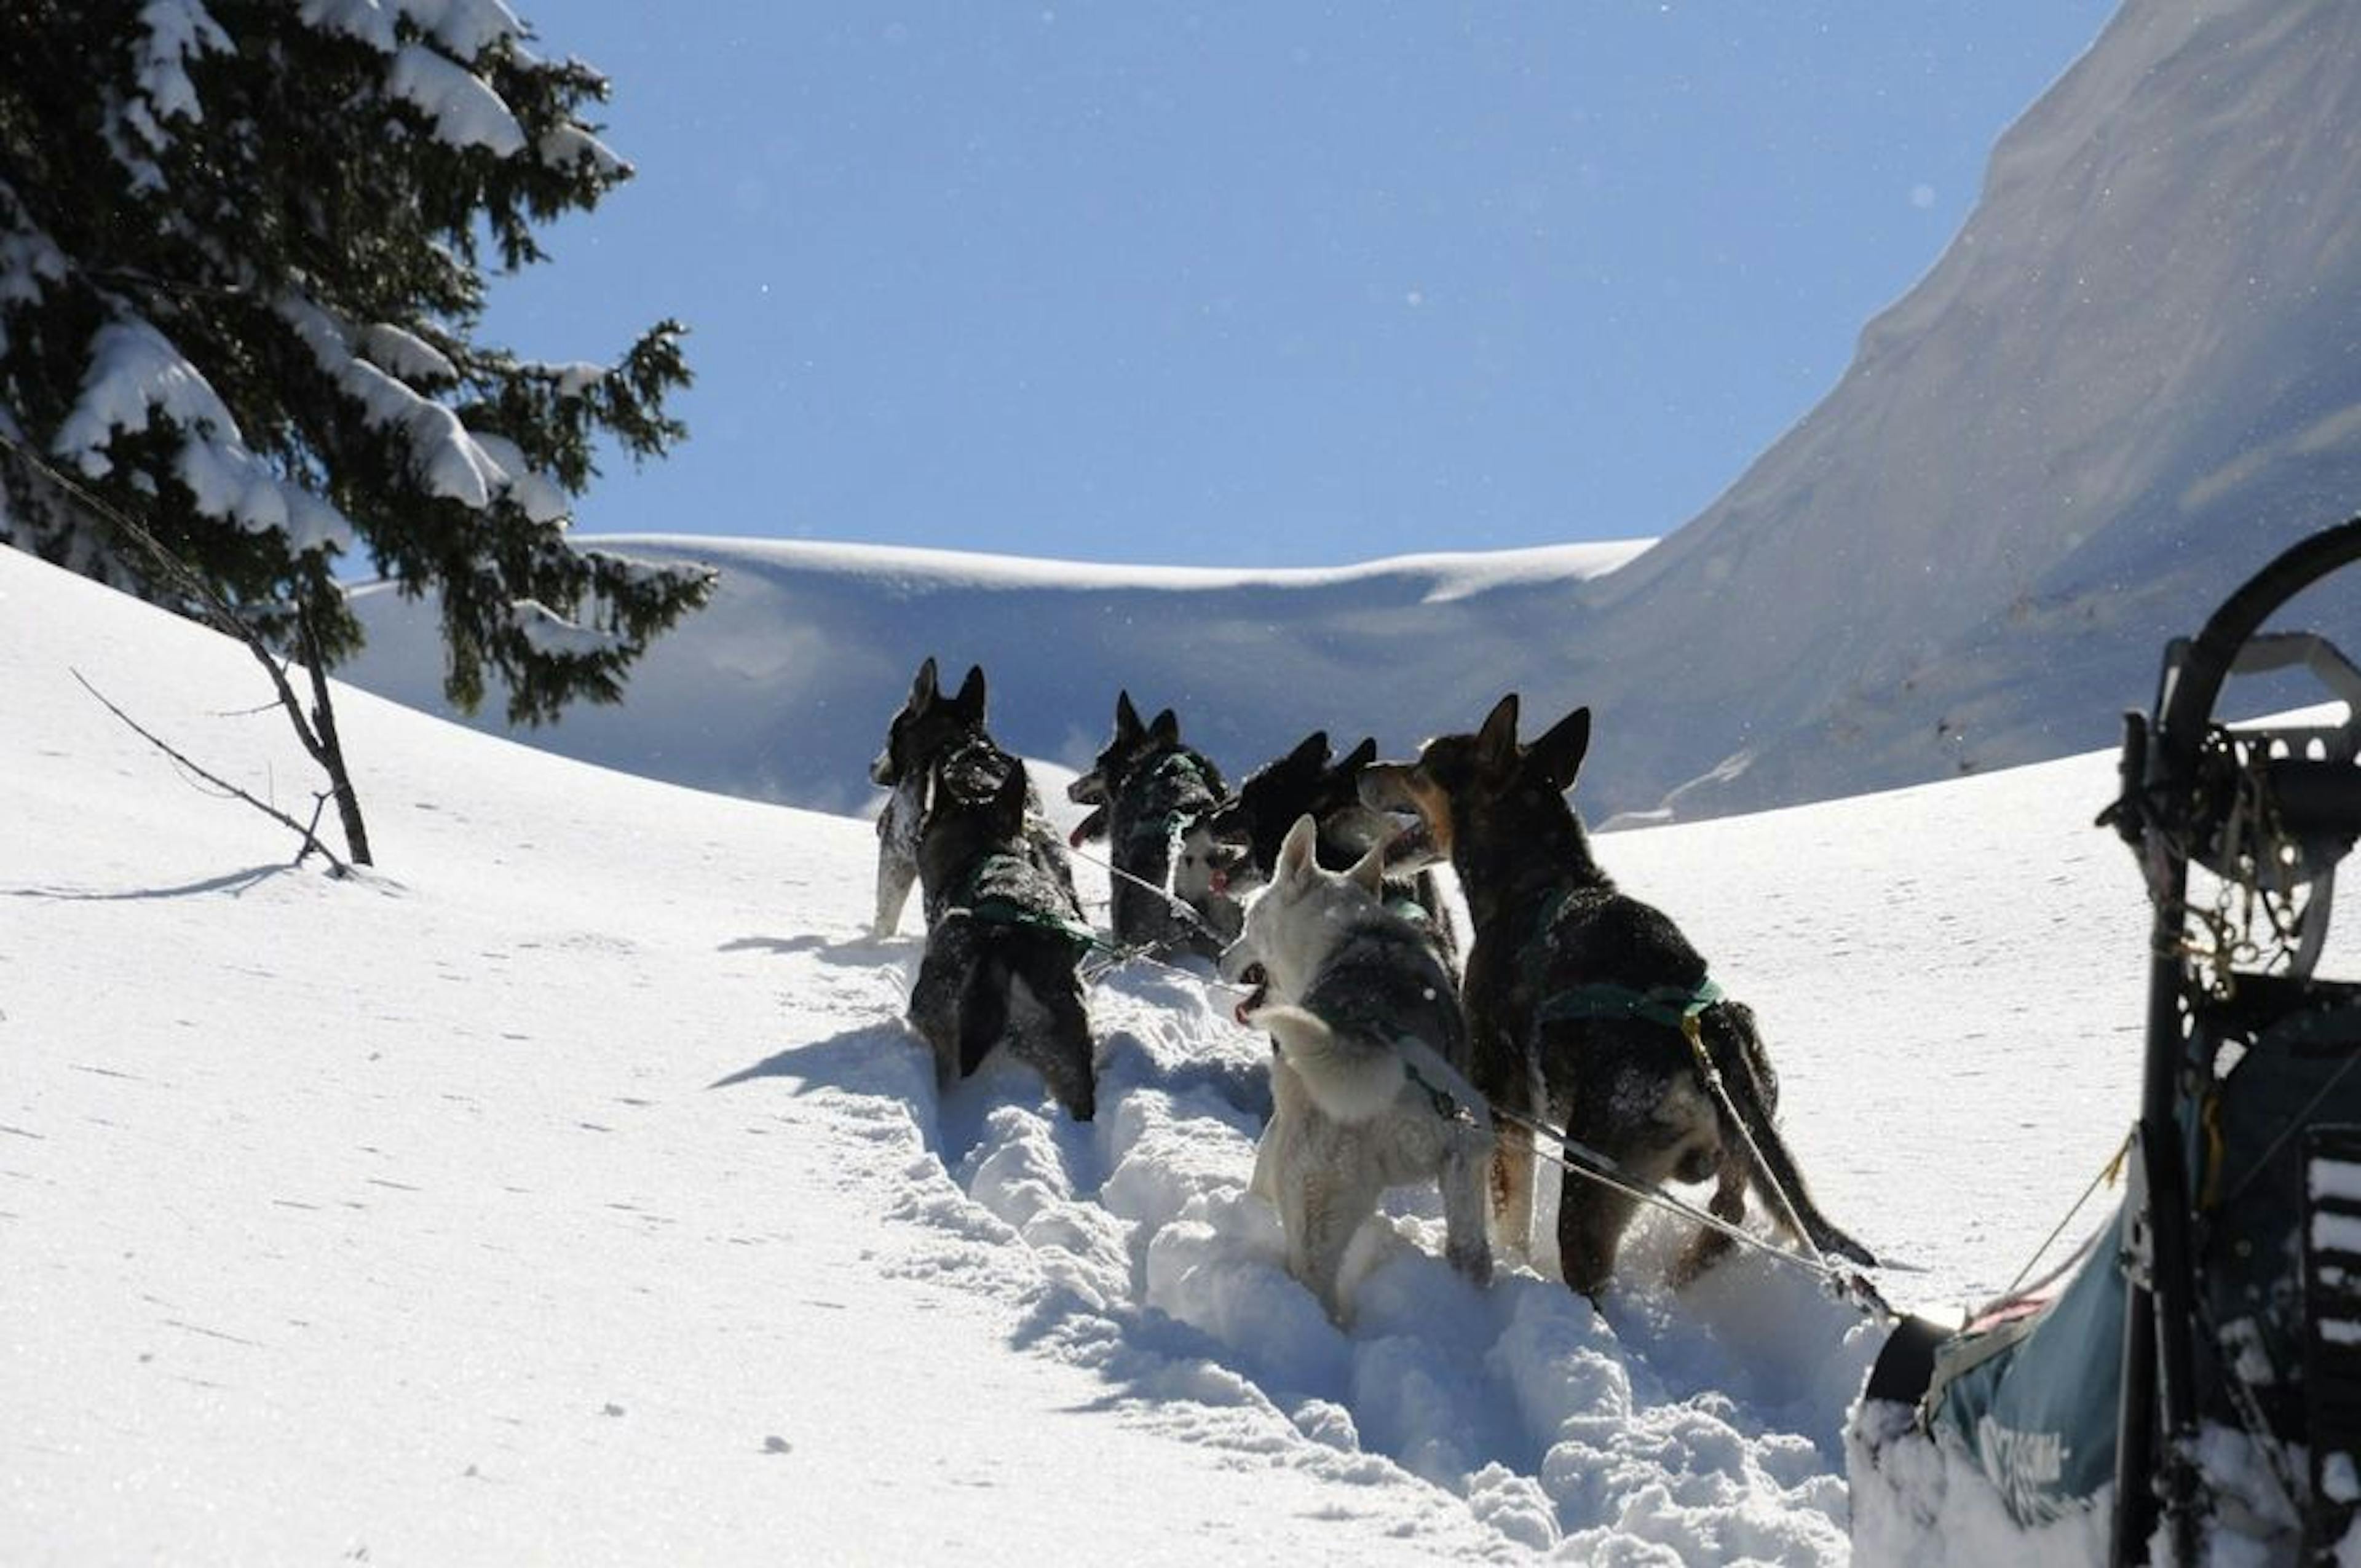 Husky day tour in winter